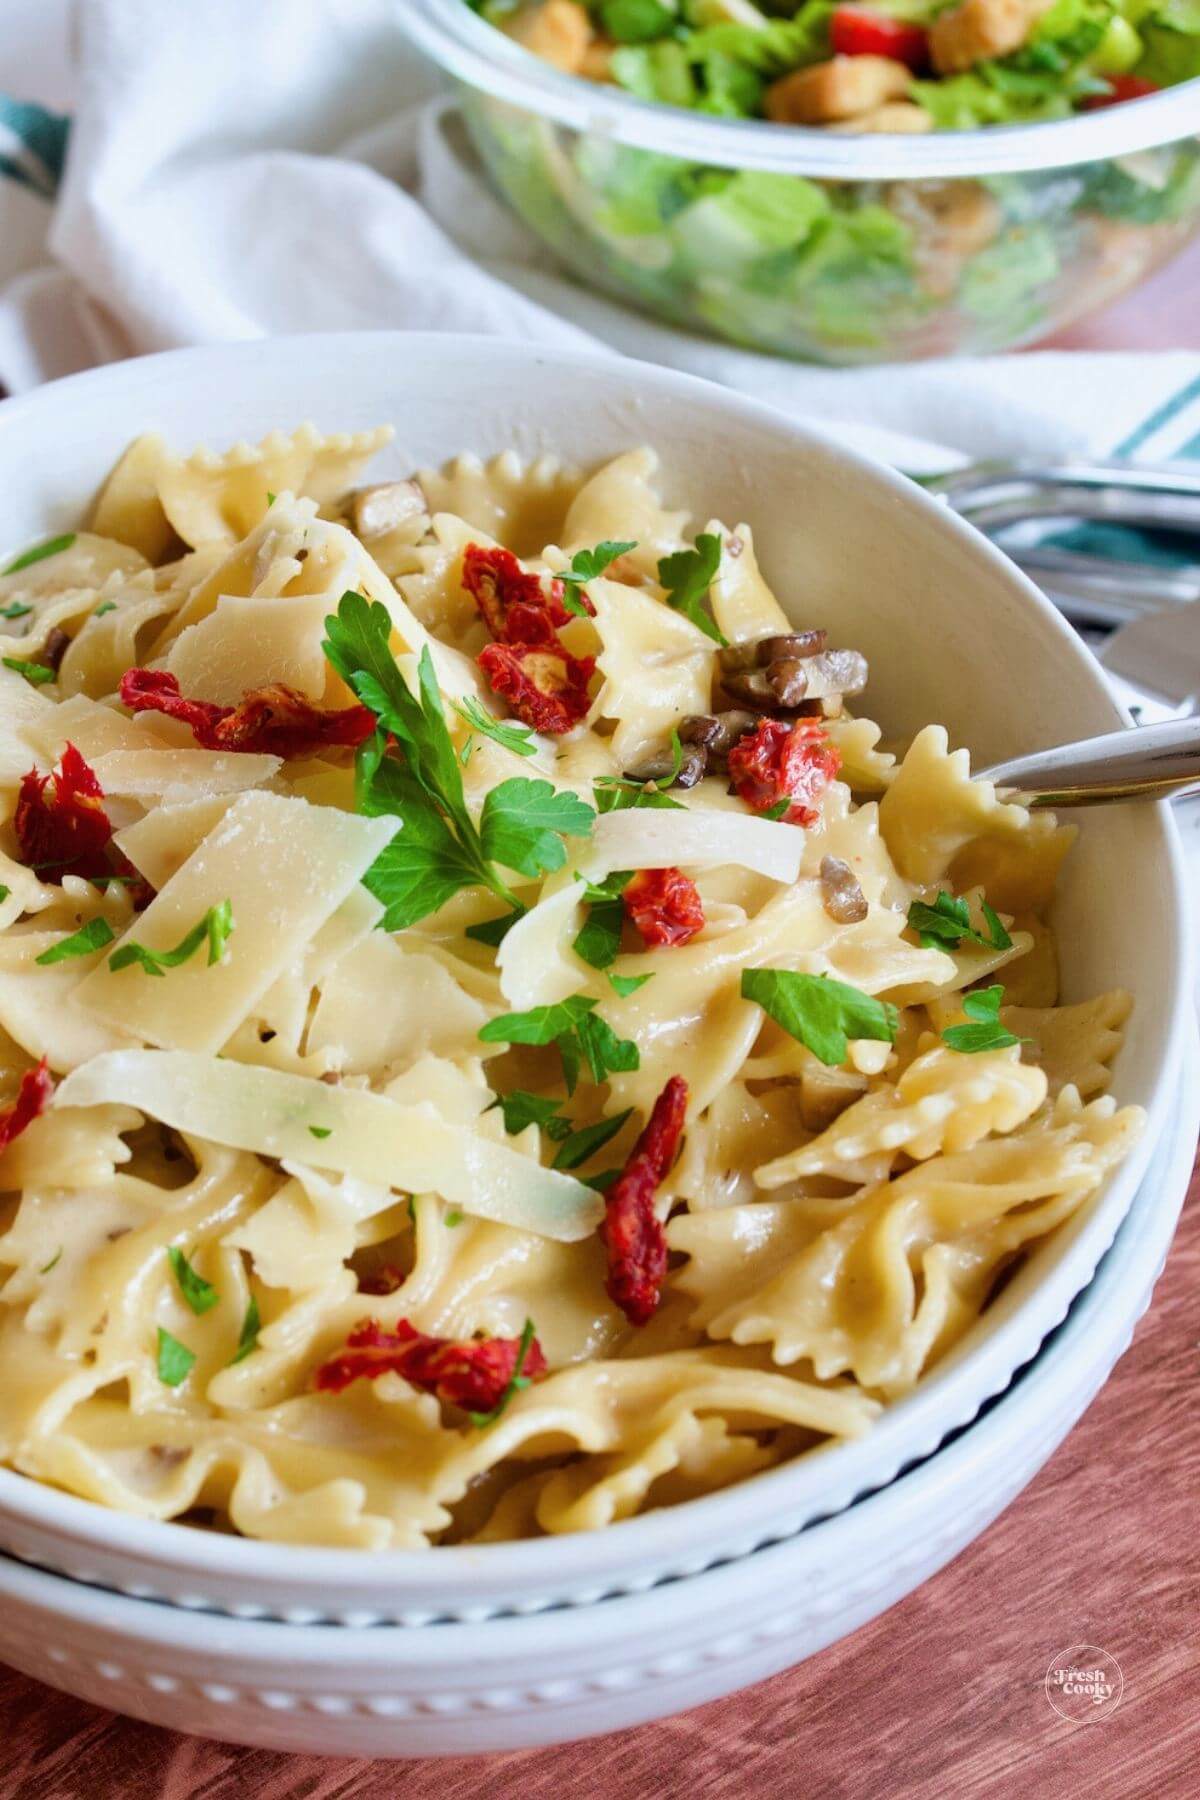 Pasta bowls filled with al dente bow tie pasta in light cream sauce with sun-dried tomatoes and mushrooms.